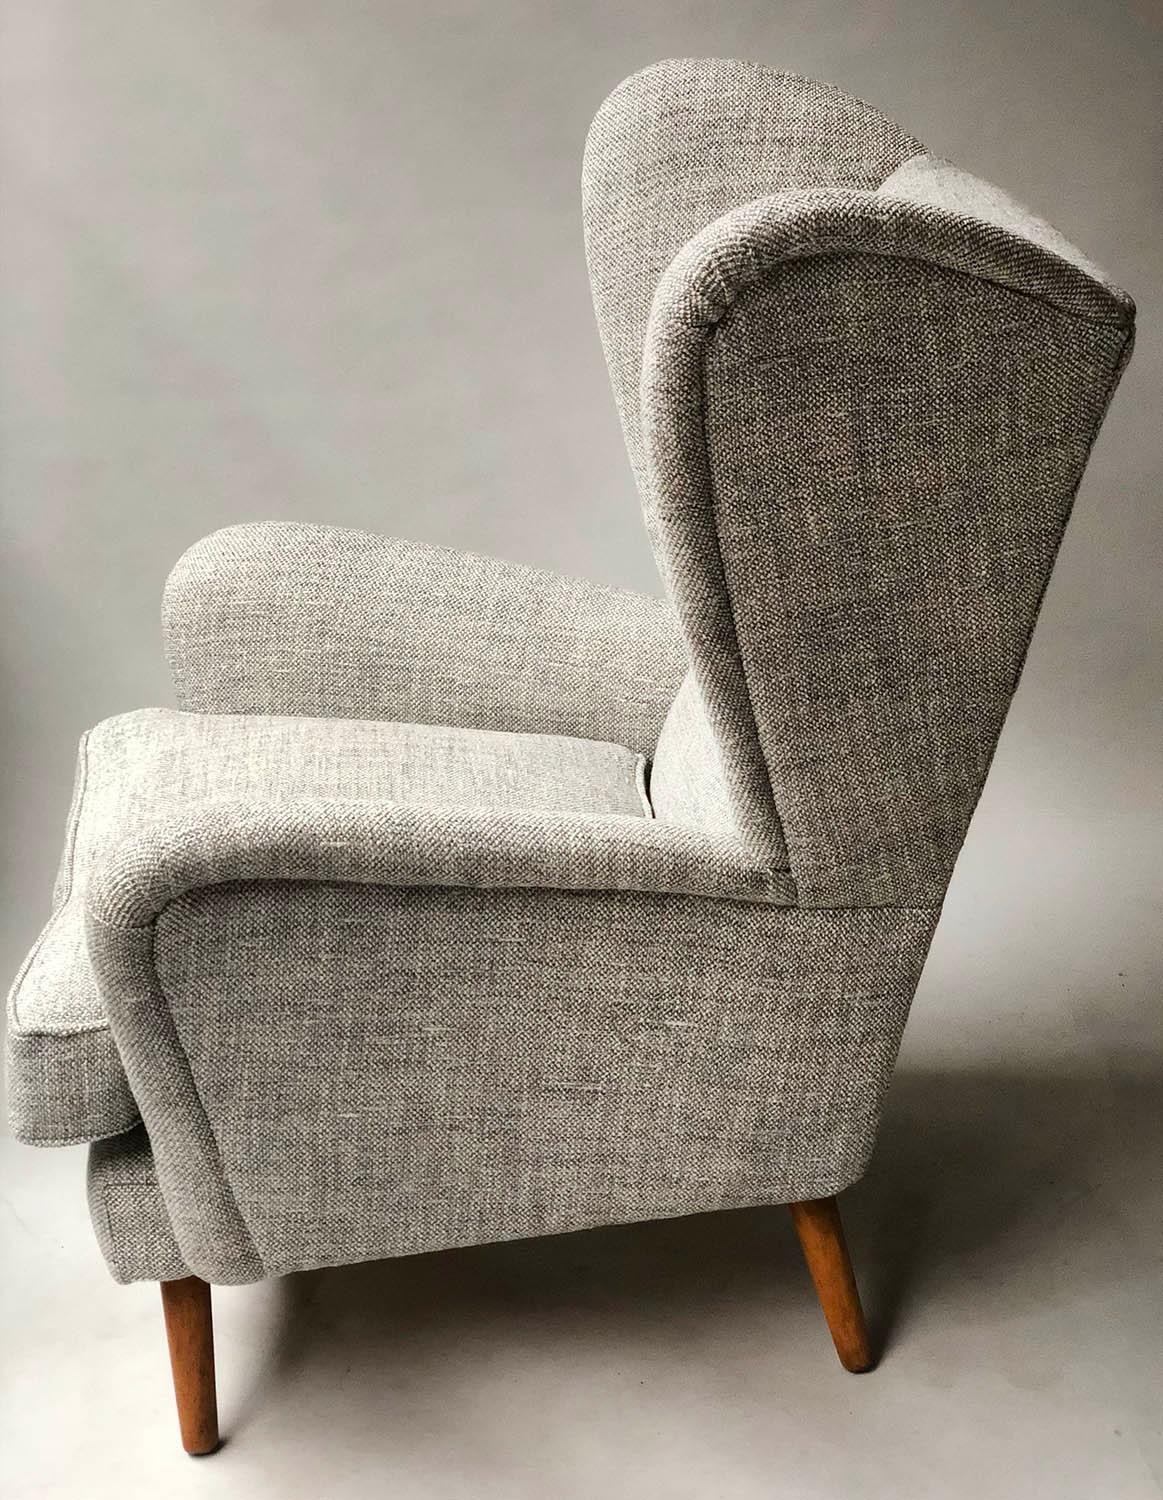 HOWARD KEITH ARMCHAIR, 1950's lounge chair newly upholstered in oatmeal soft tweed with splay - Image 5 of 5